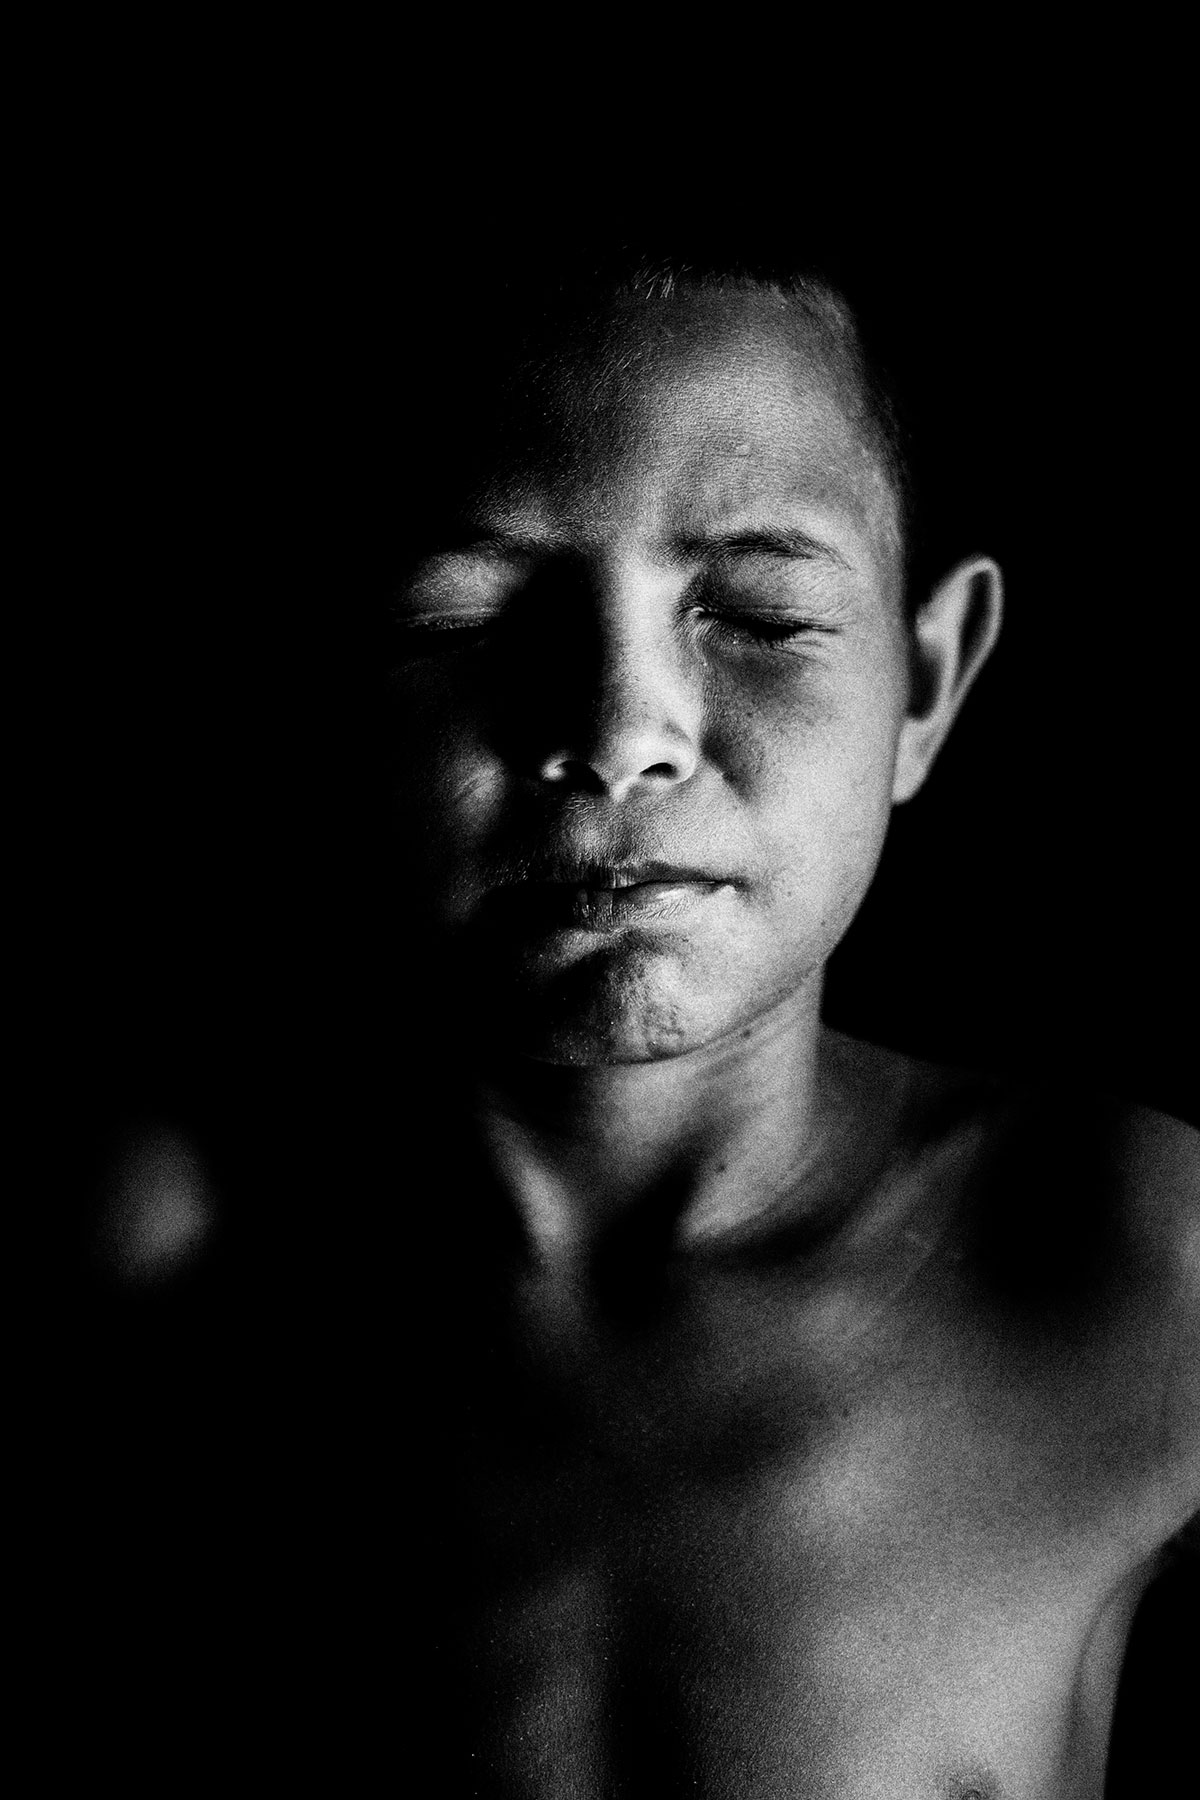 Eyes Closed Portrait of a Child from Ilha dos Lençóis: Black and White Portrait Photography by Jean Tran and Élysée Lang